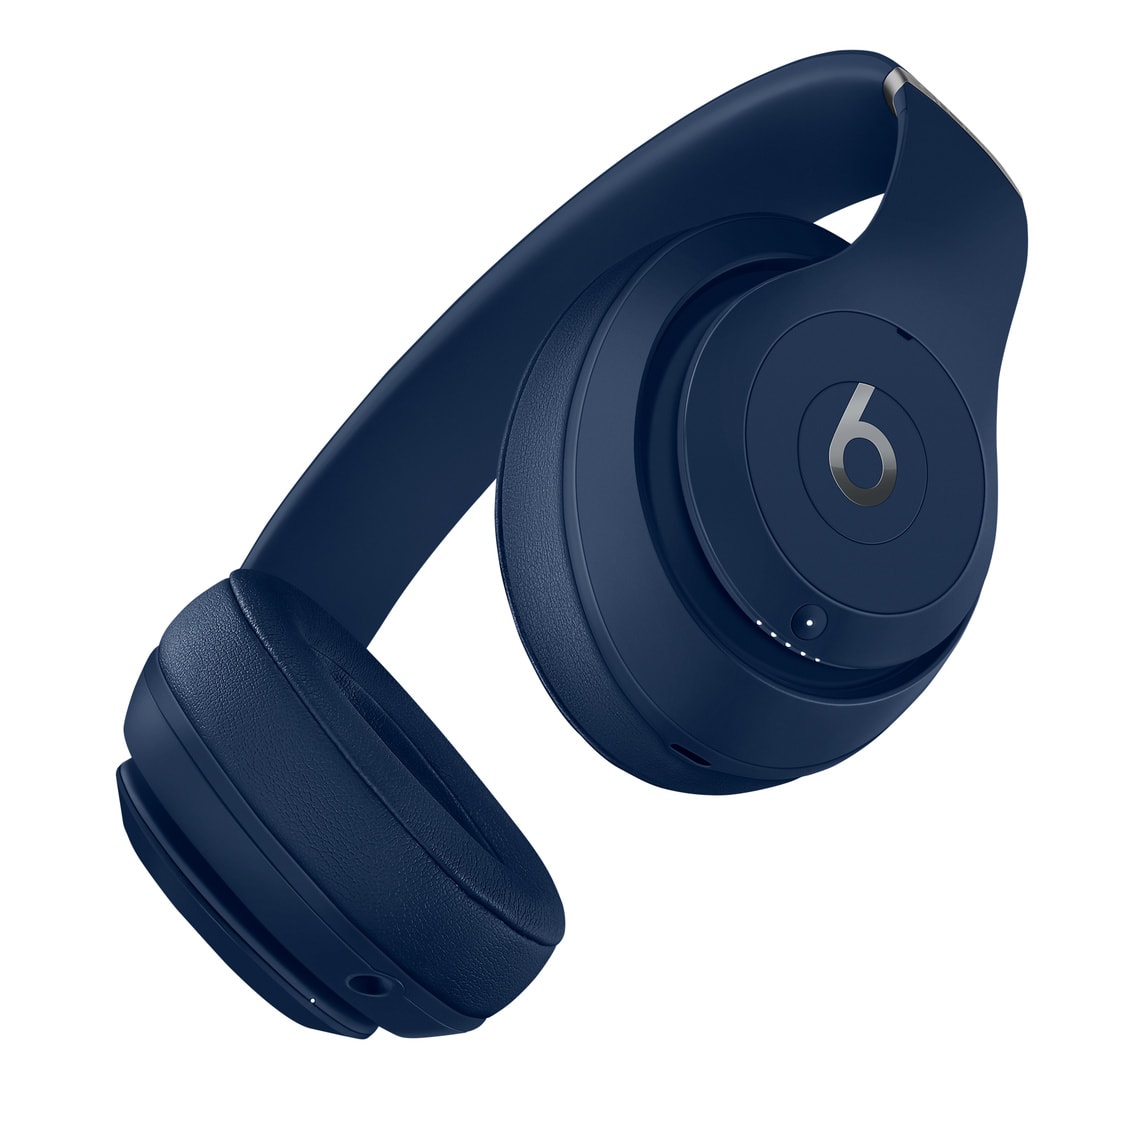 The new headphones may look a lot like Beats Studio3 cans, but with big upgrades to functionality.